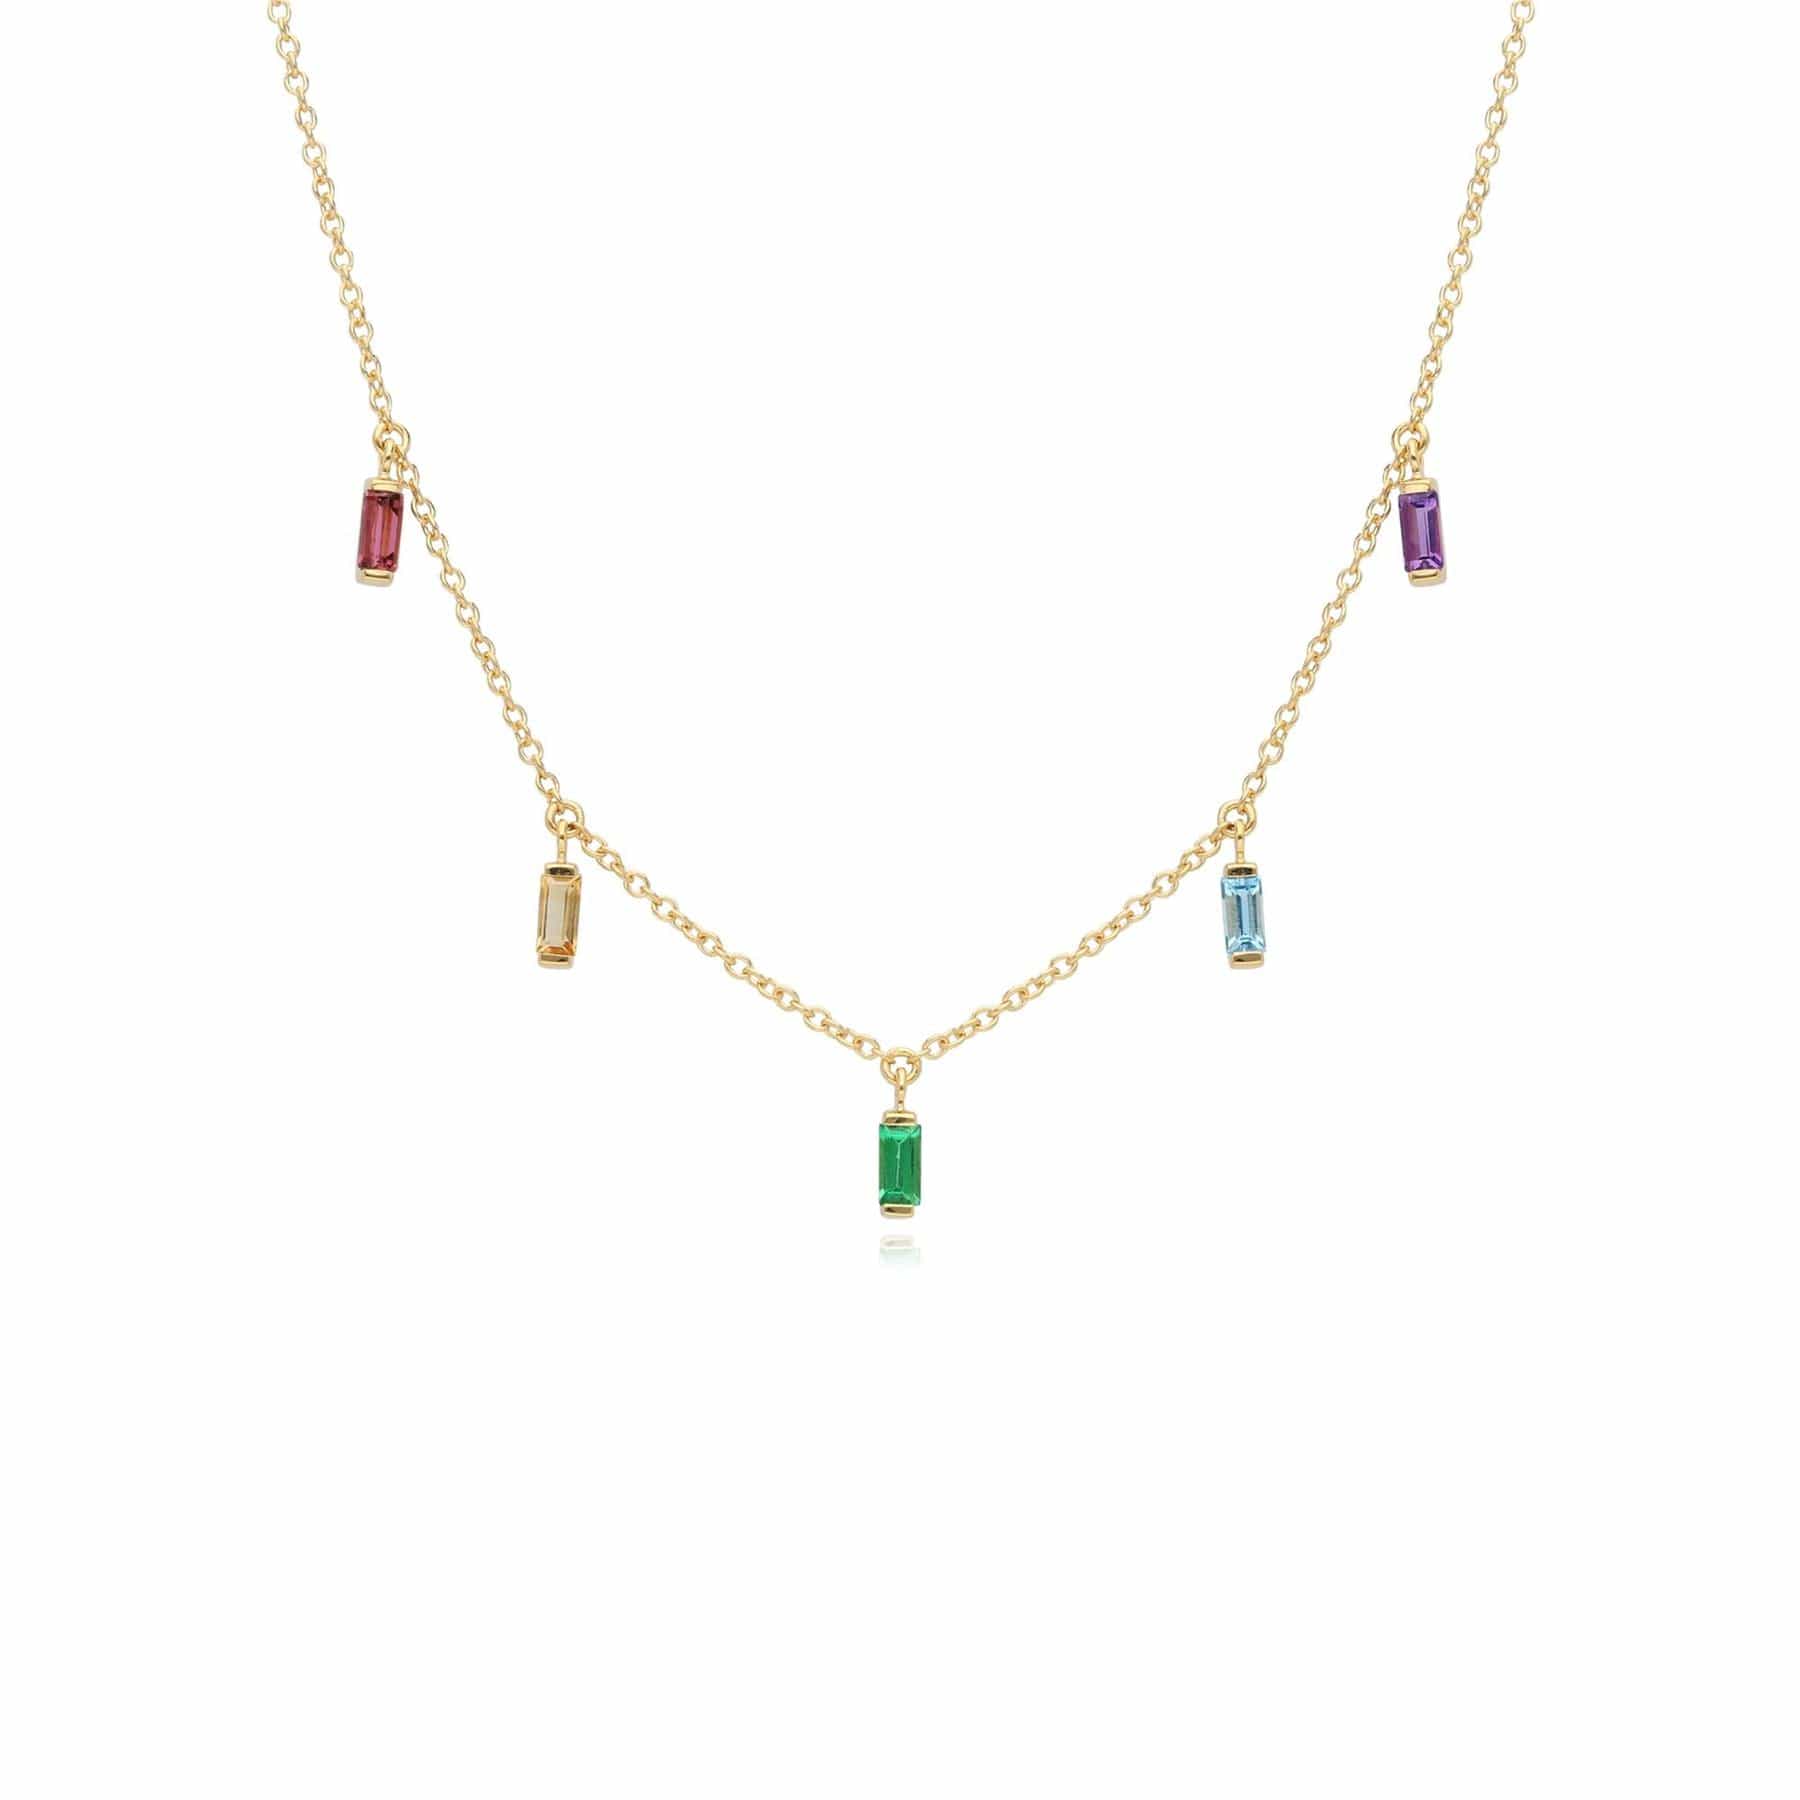 Rainbow Choker Necklace in Gold Plated Sterling Silver